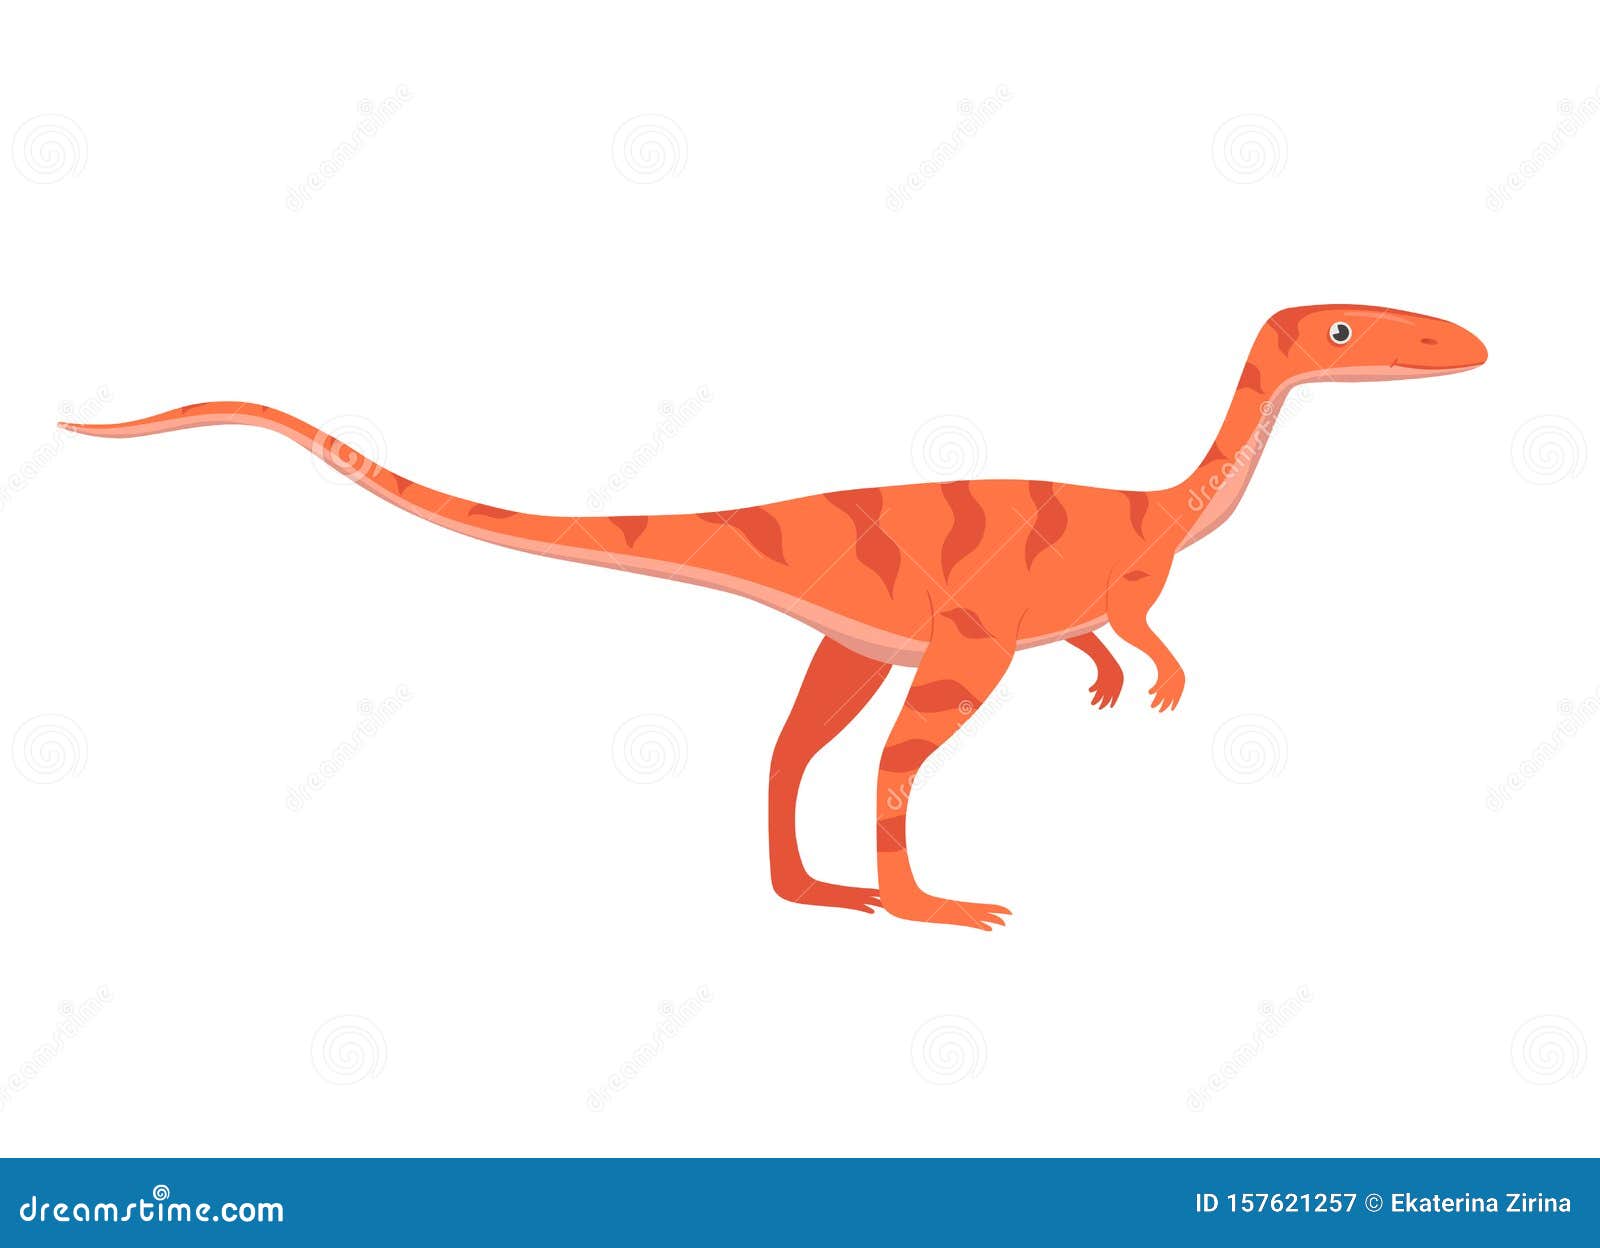 Velociraptor In Cartoon Style Isolated On White Background. Vector